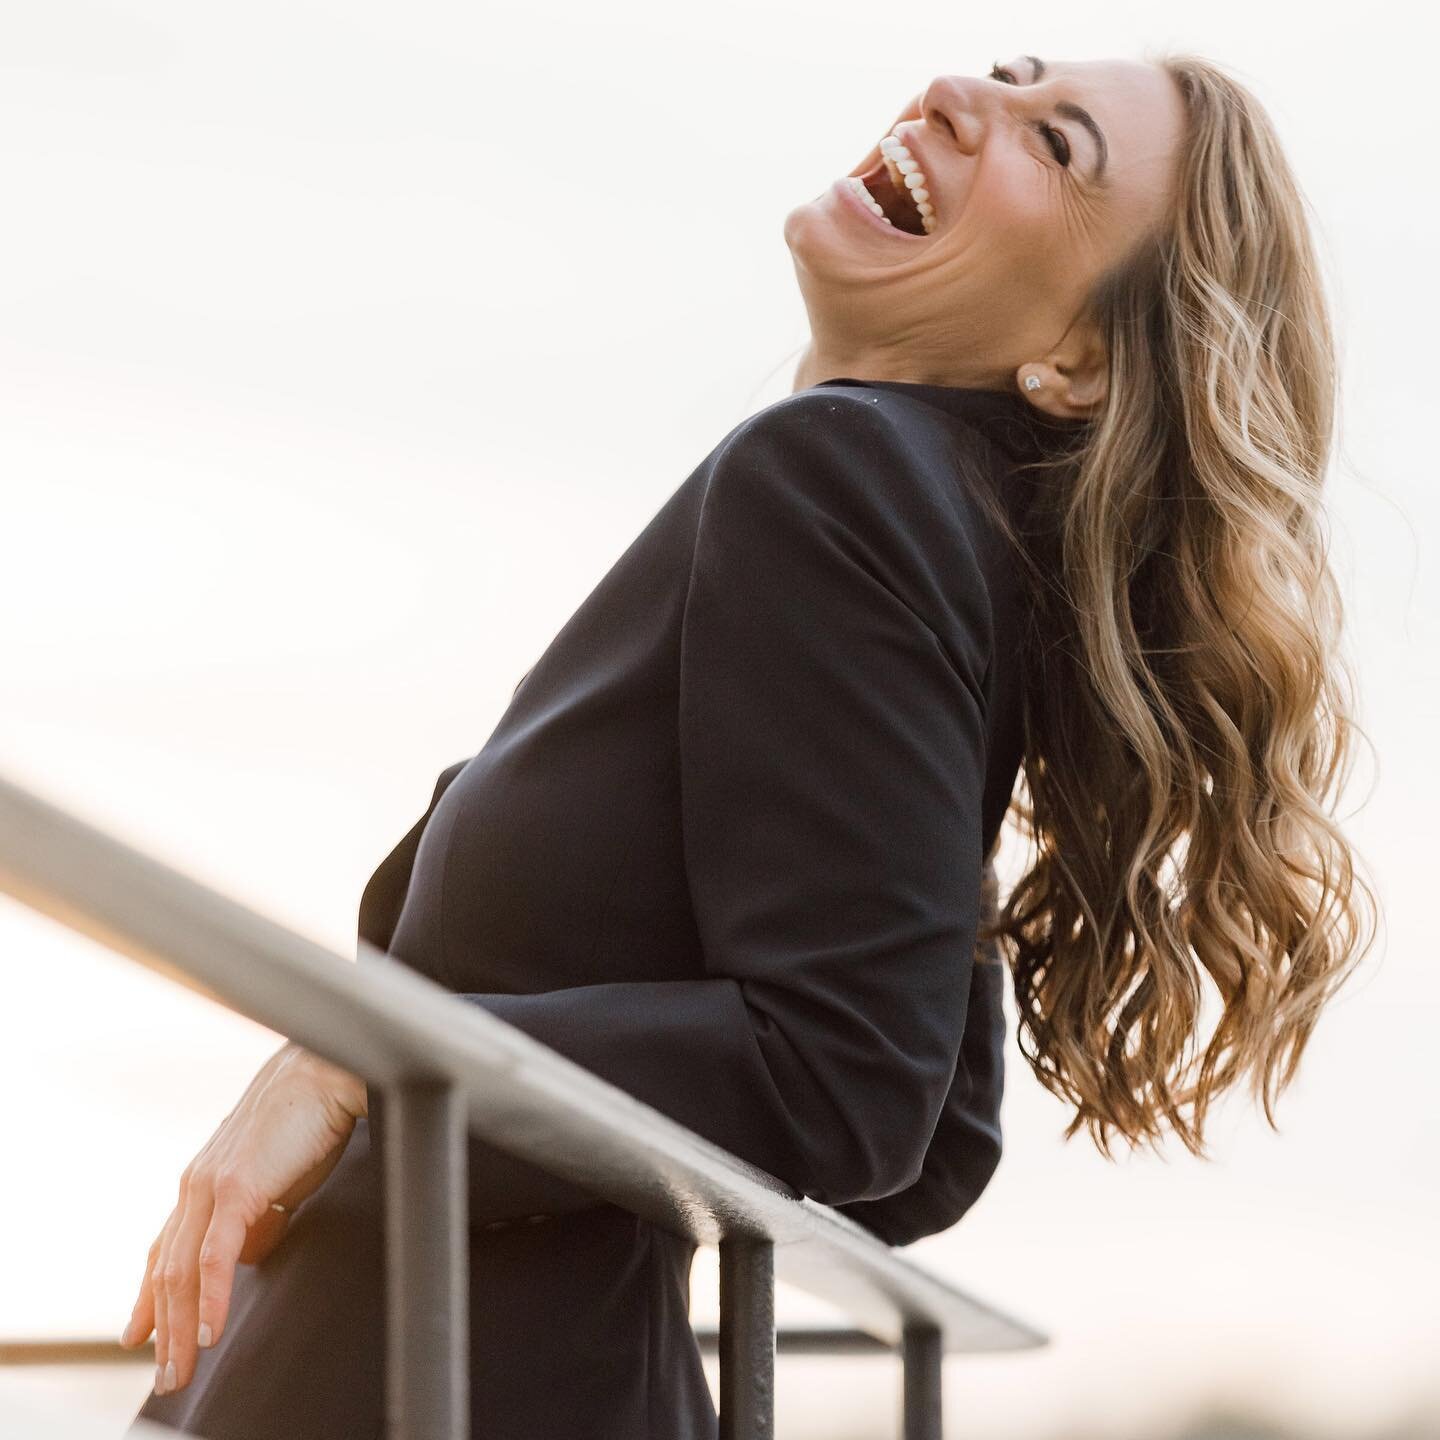 If you want to feel better fast, laugh 😂

That&rsquo;s it. That&rsquo;s the post 😘

Just kidding!

Pleasure Challenge: BONUS DAY 🥰🥰

The science of laughter supports its role in two main areas: building social cohesion and reducing pain. 

In lab